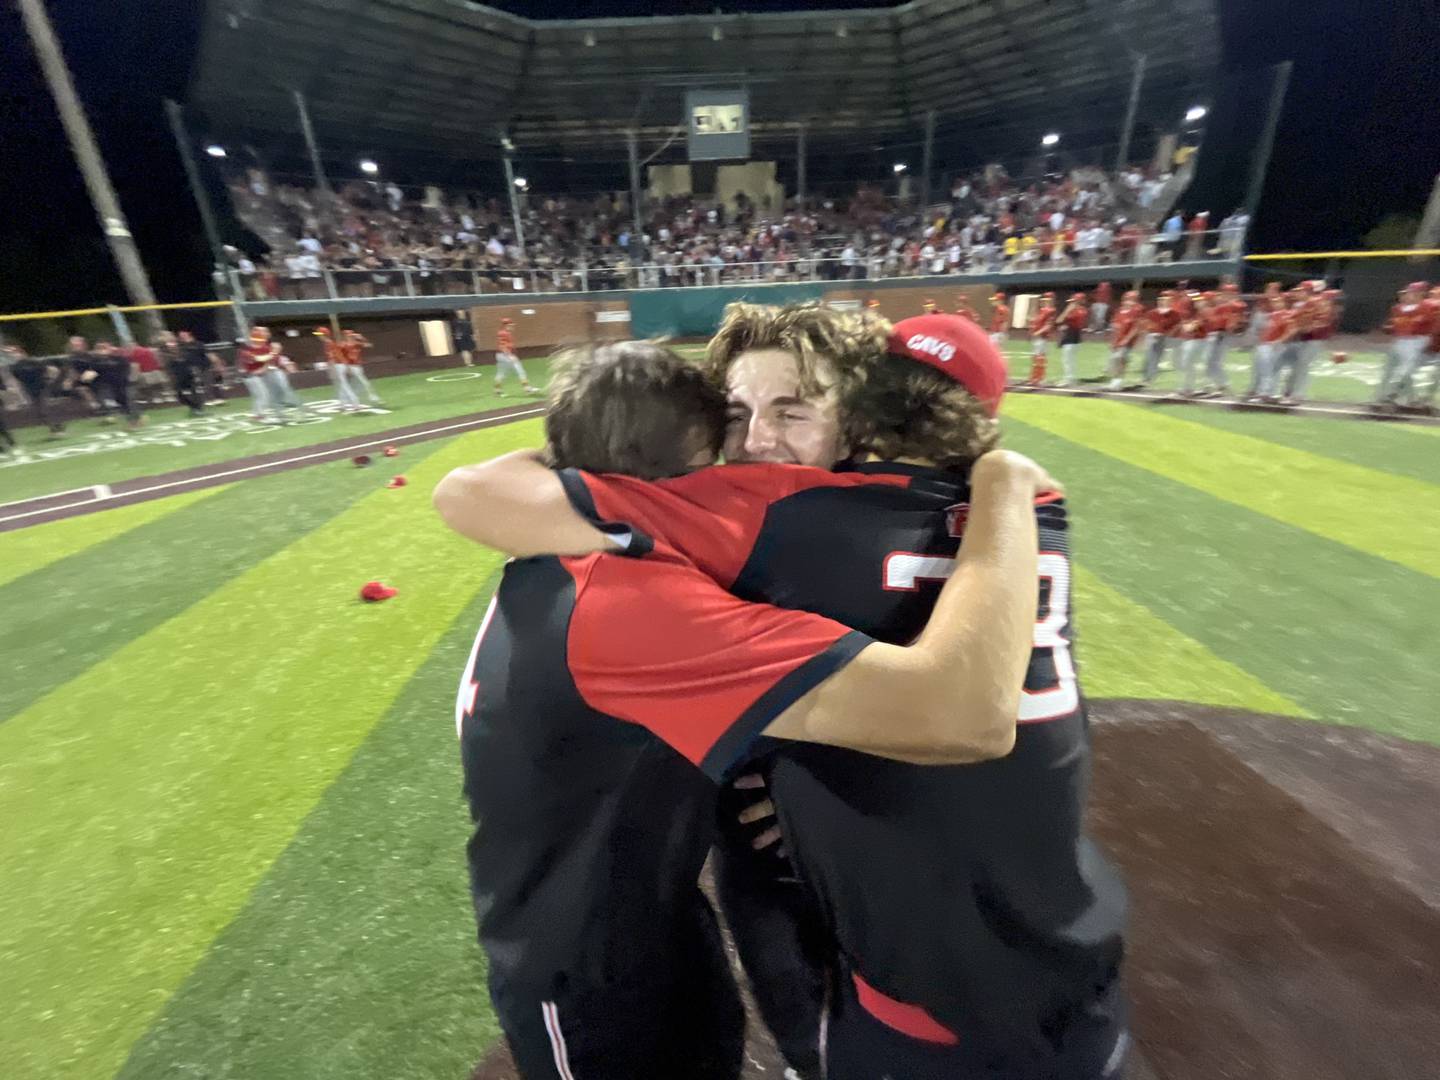 Spalding's Parker Thomas (center) is hugged by teammates after Sunday night's title clinching victory in the MIAA A Conference Tournament. In his final game, Thomas pitched a two-hitter as No. 1 Spalding defeated Calvert Hall at Joe Cannon Stadium in Harmans.